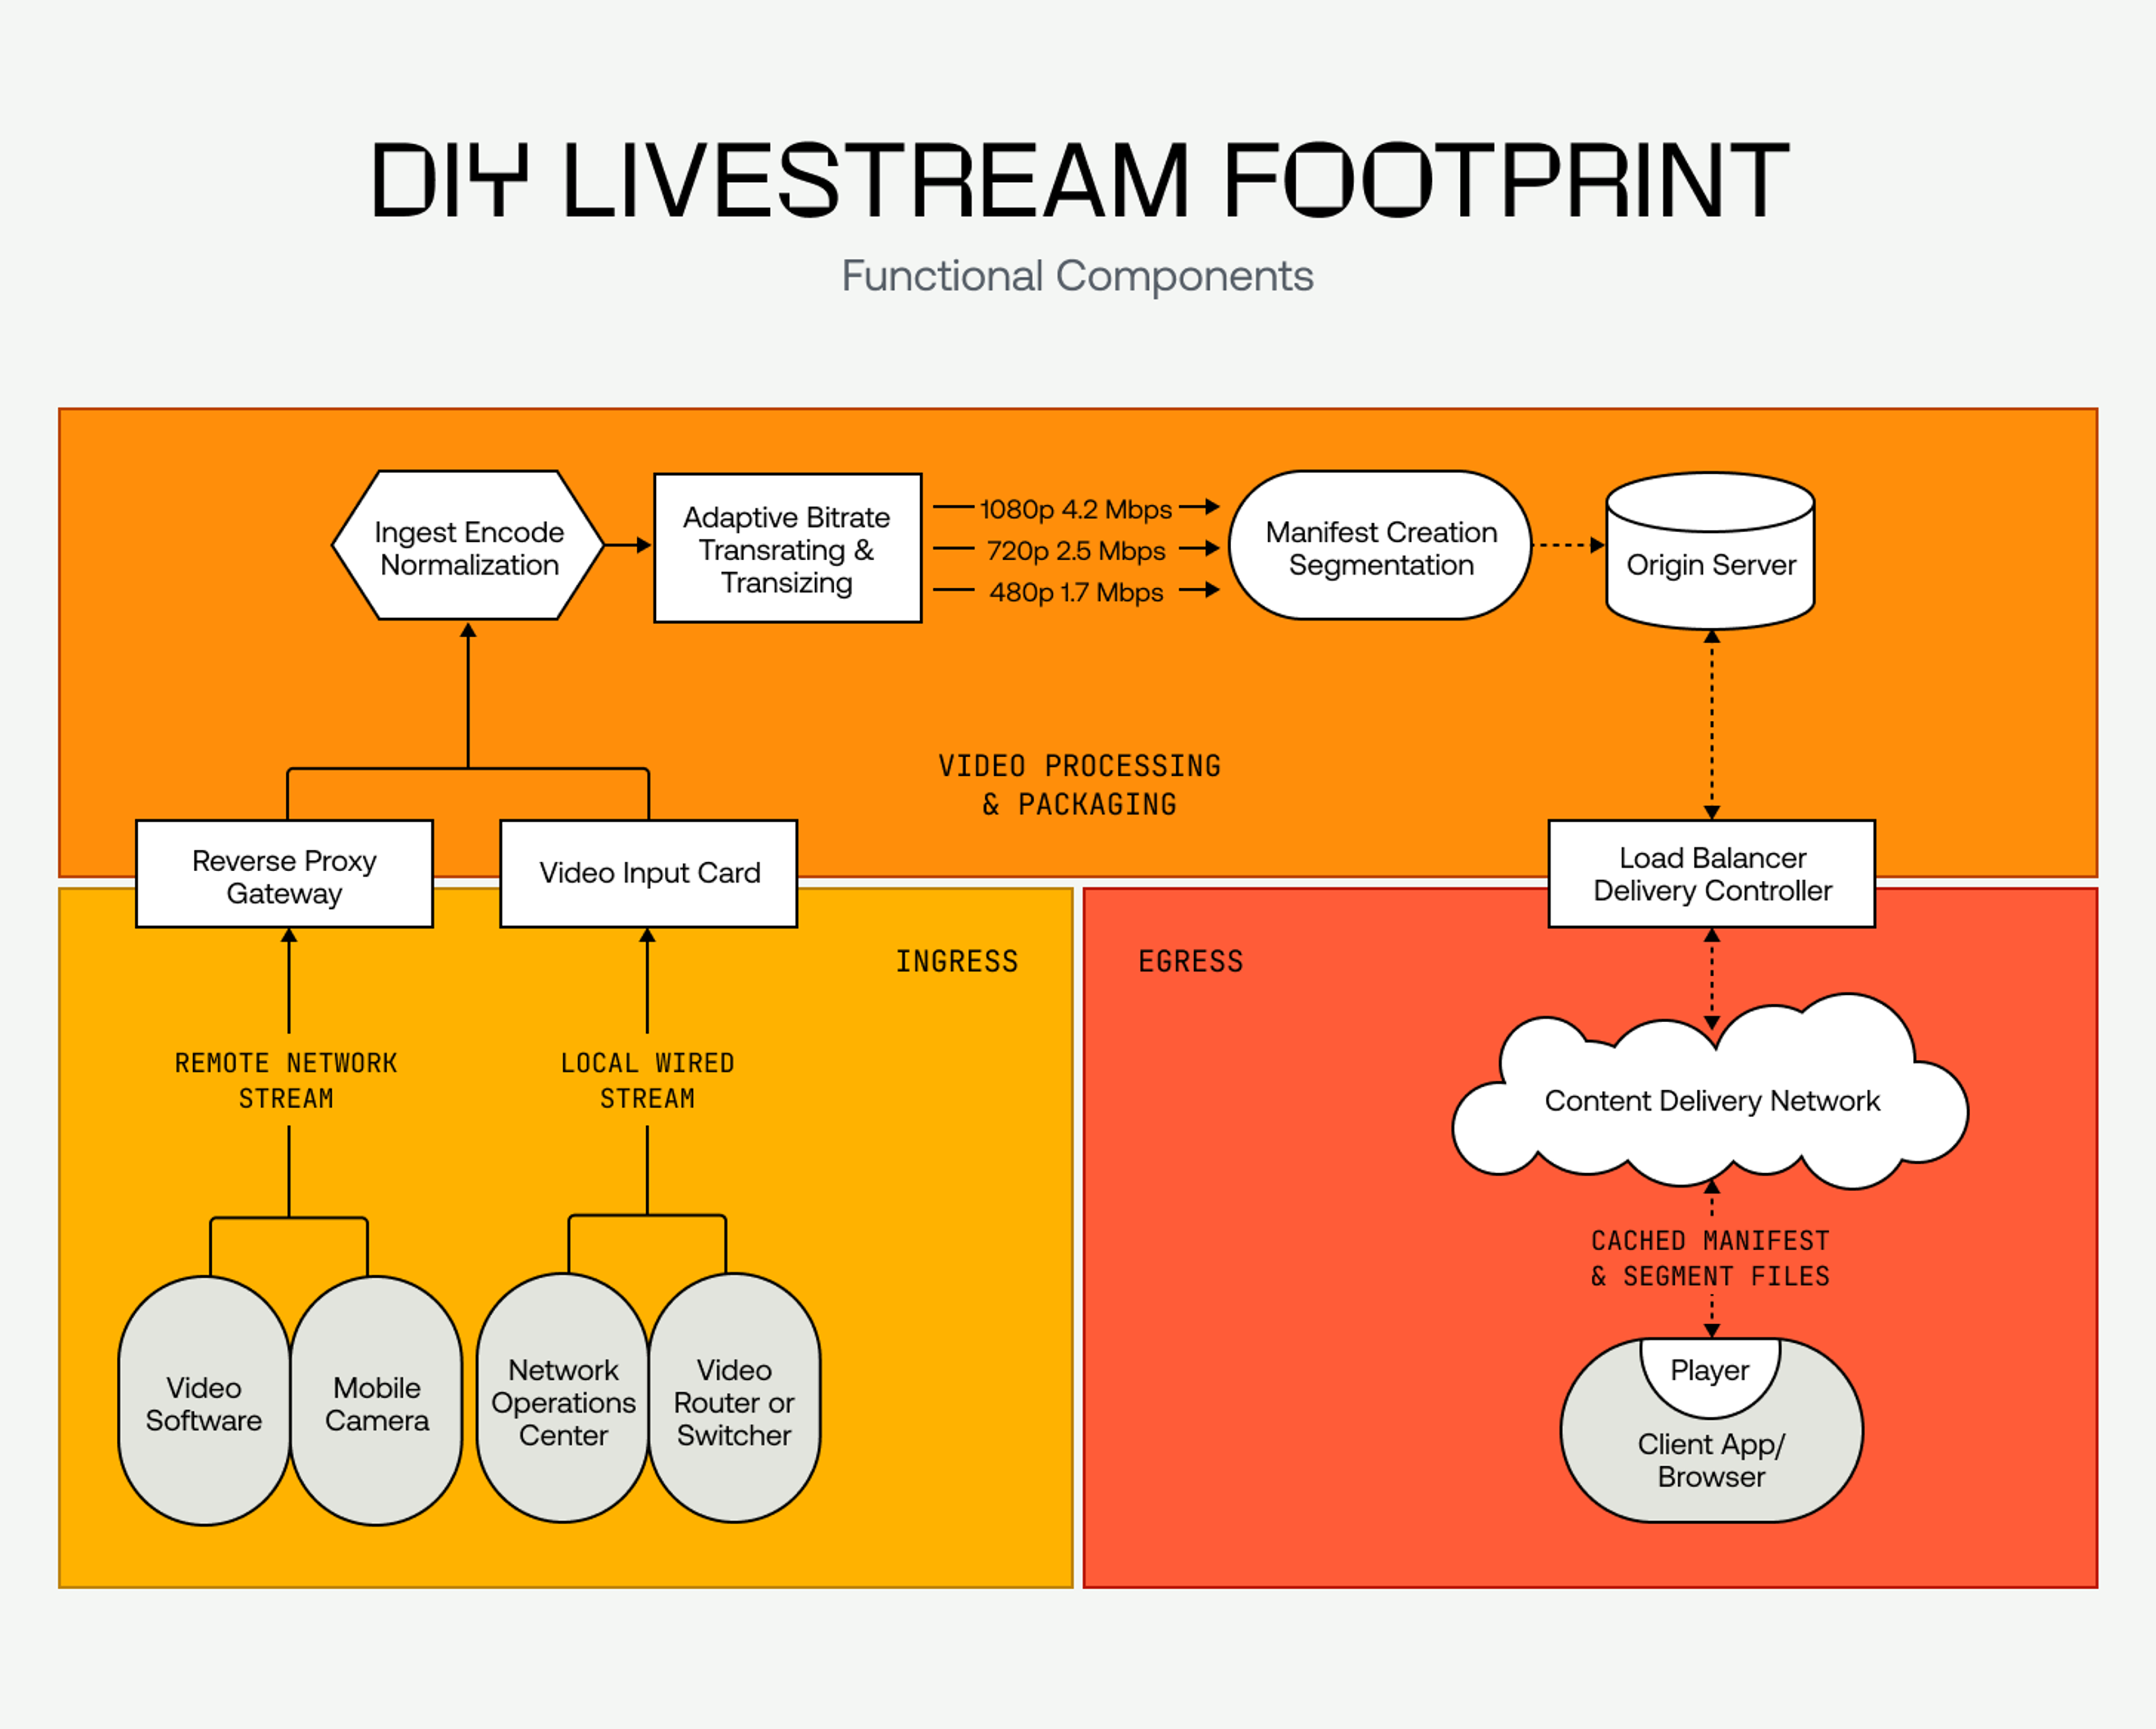 An integration diagram depicting the typical footprint of a DIY livestreaming pipeline configuration.